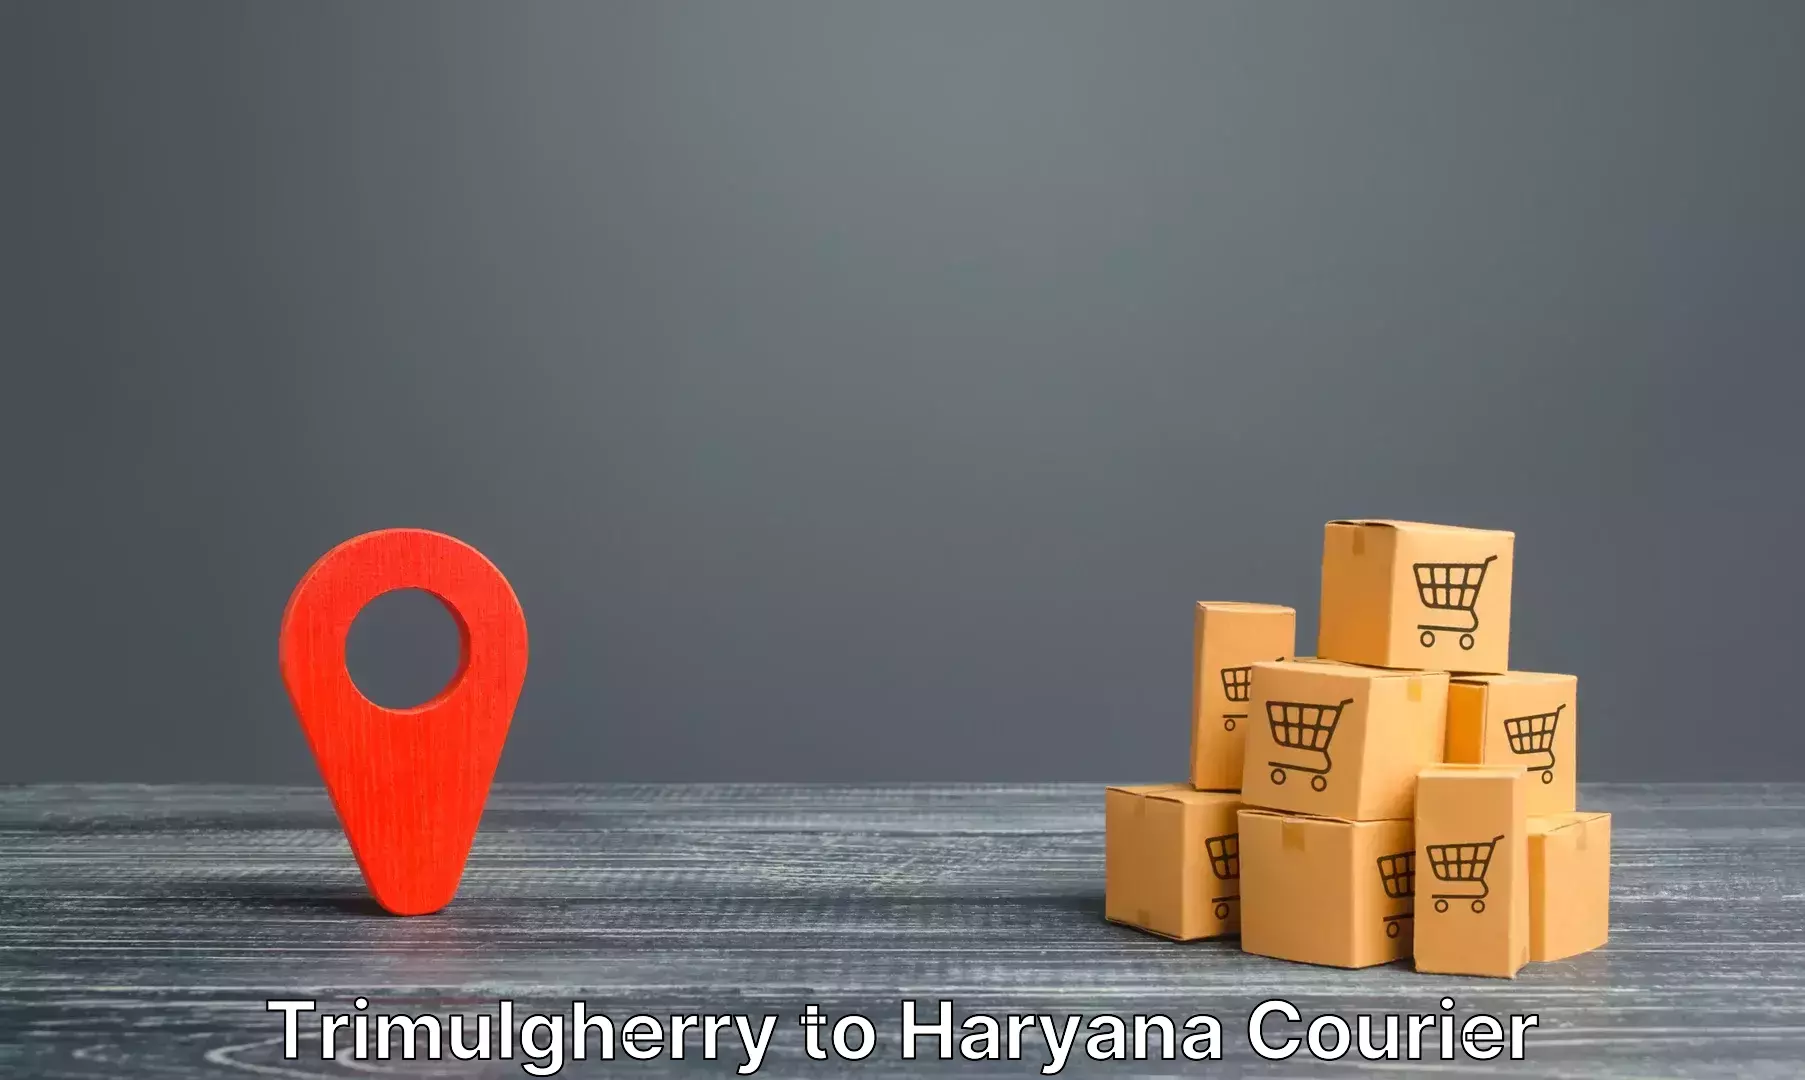 Luggage transport company Trimulgherry to Chaudhary Charan Singh Haryana Agricultural University Hisar